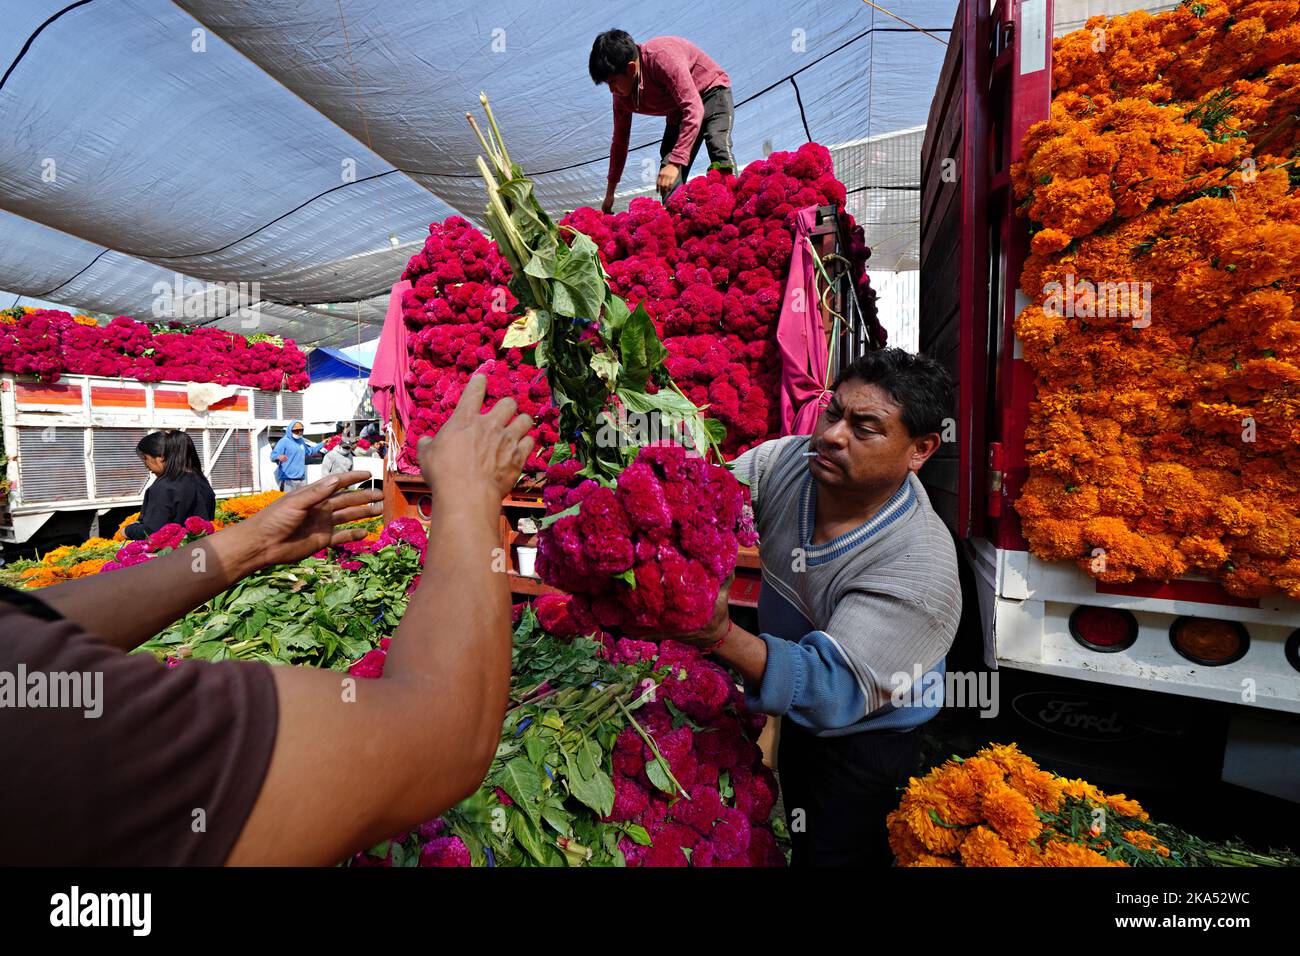 Mexico City, Mexico. 31st Oct, 2022. Flower sellers do brisk business selling red cockscomb and cempasuchil, the traditional flowers of the Day of the Dead flower used to decorate altars and gravesites during the annual festival at the Jamaica Flower Market, October 31, 2022 in Mexico City, Mexico. Credit: Richard Ellis/Richard Ellis/Alamy Live News Stock Photo